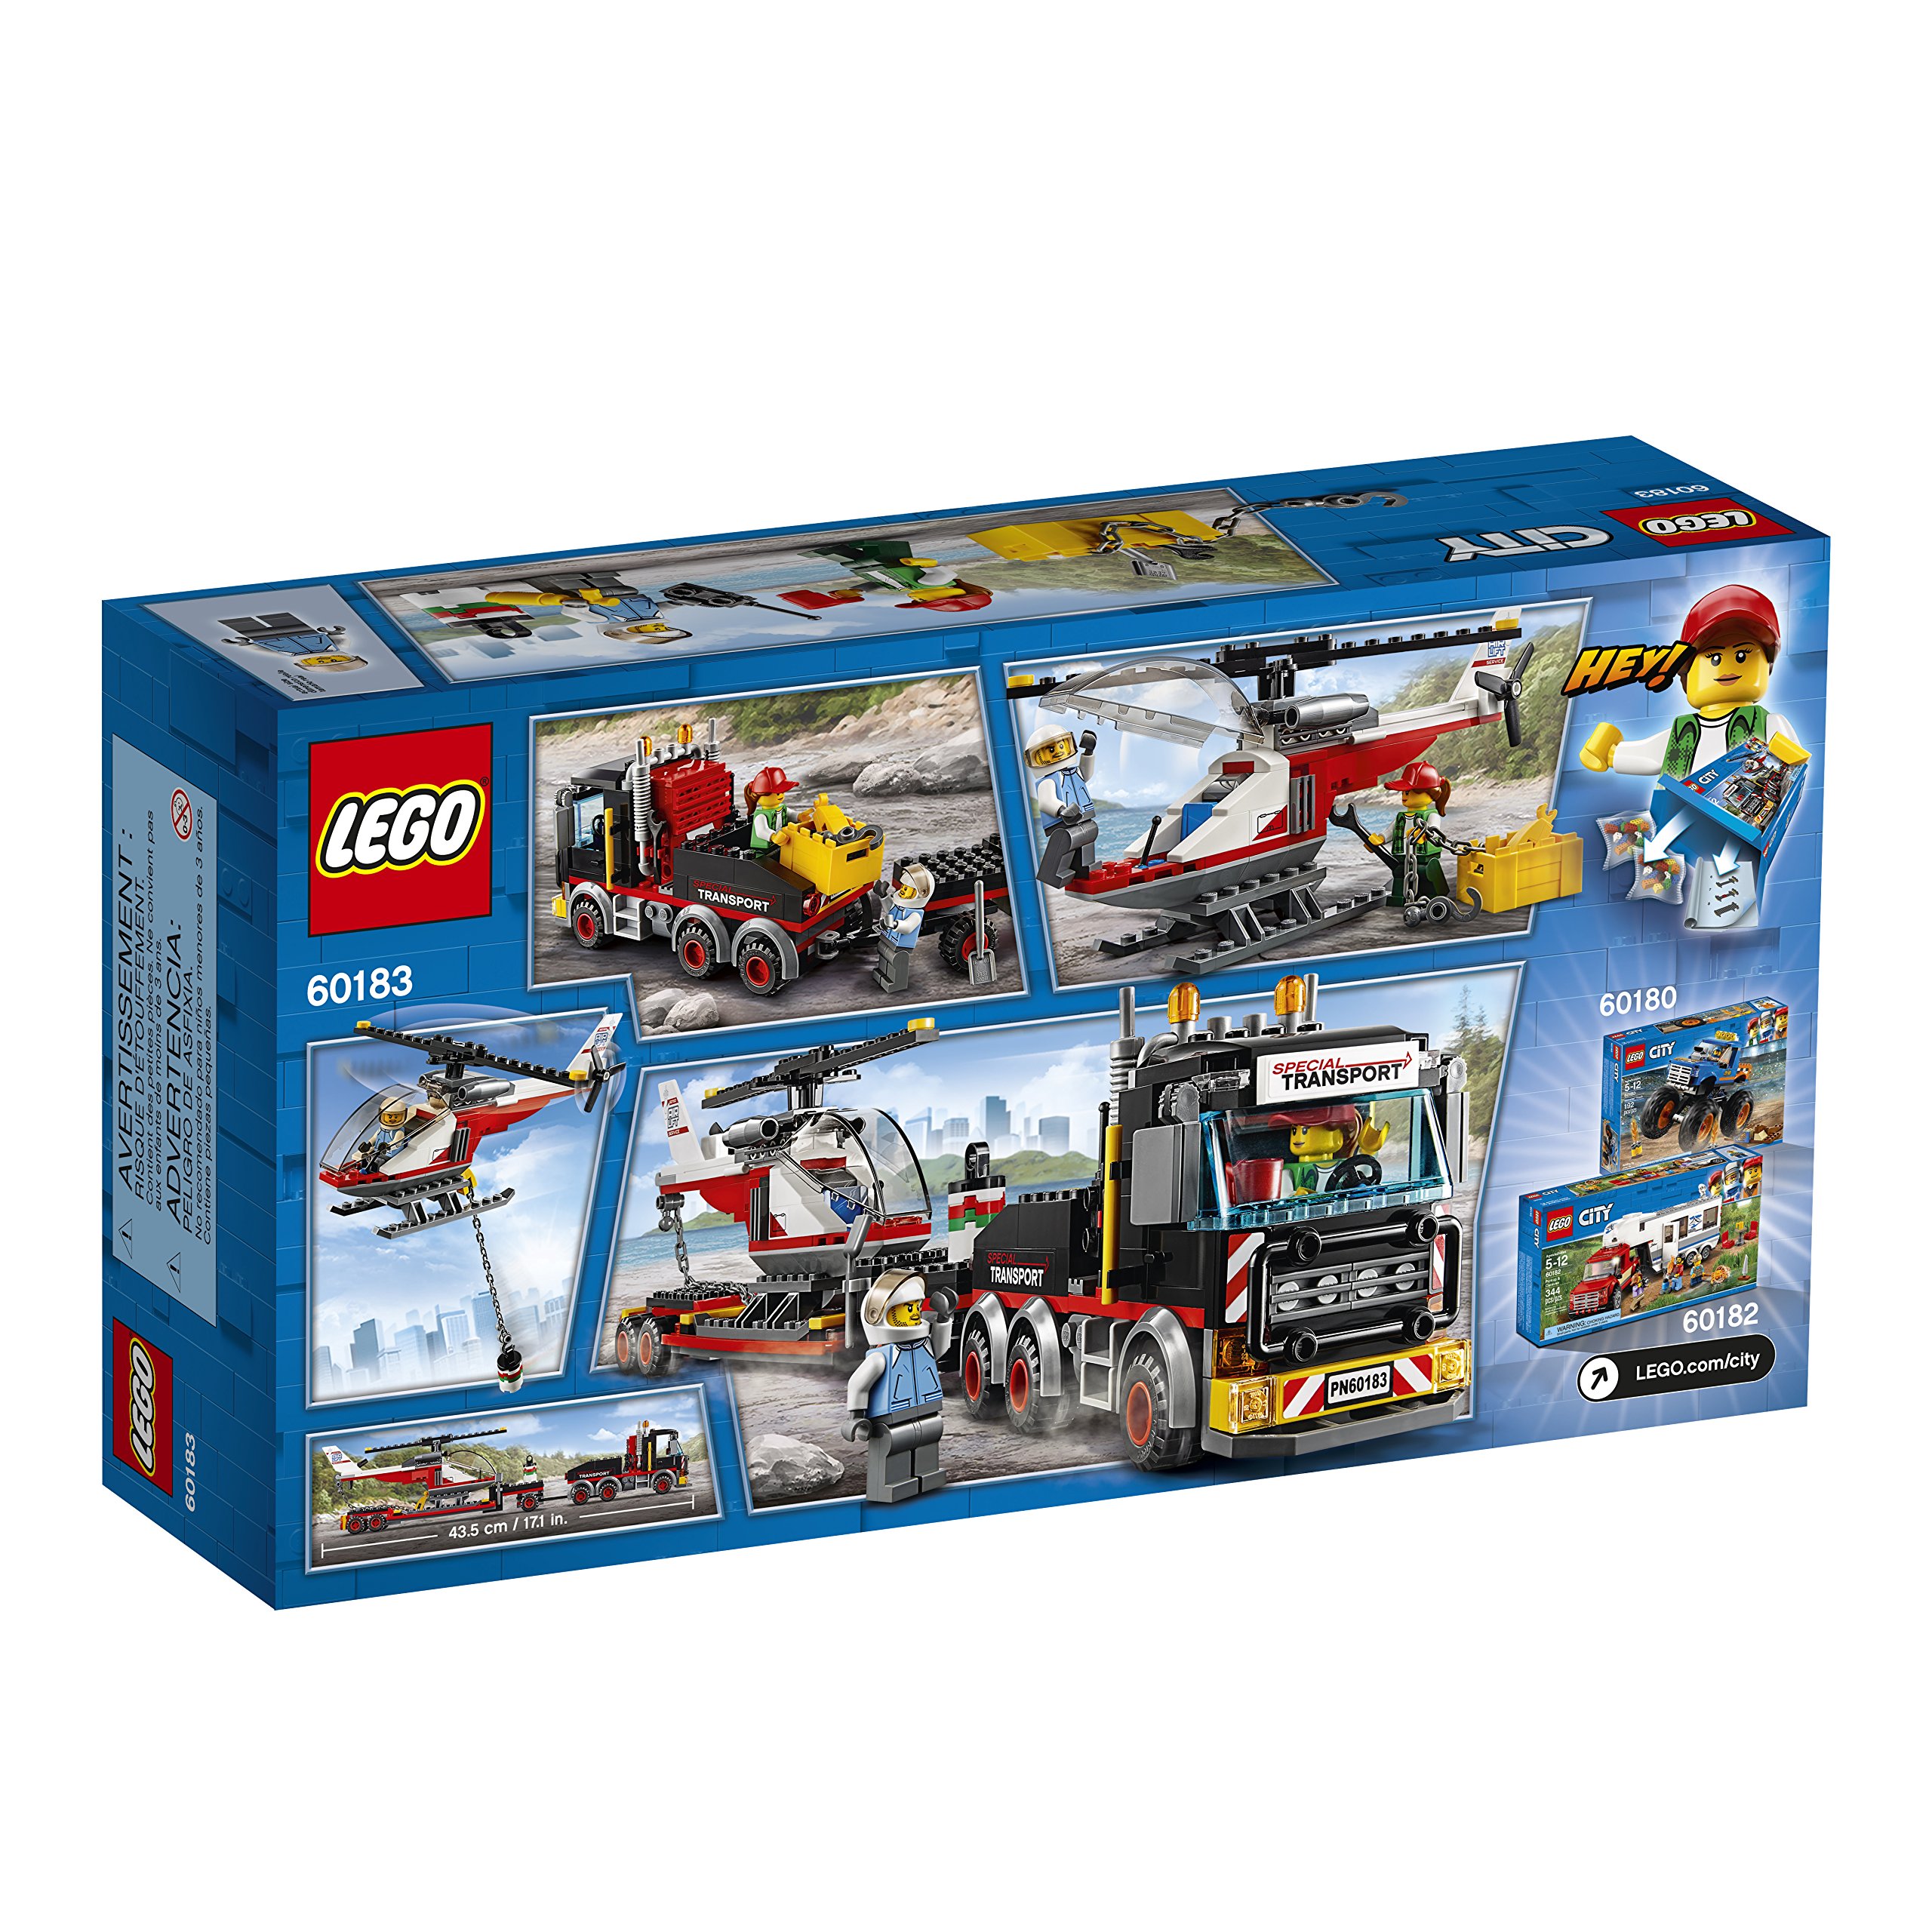 LEGO City Heavy Cargo Transport 60183 Toy Truck Building Kit with Trailer, Toy Helicopter and Construction Minifigures for Creative Play (310 Pieces) (Discontinued by Manufacturer)